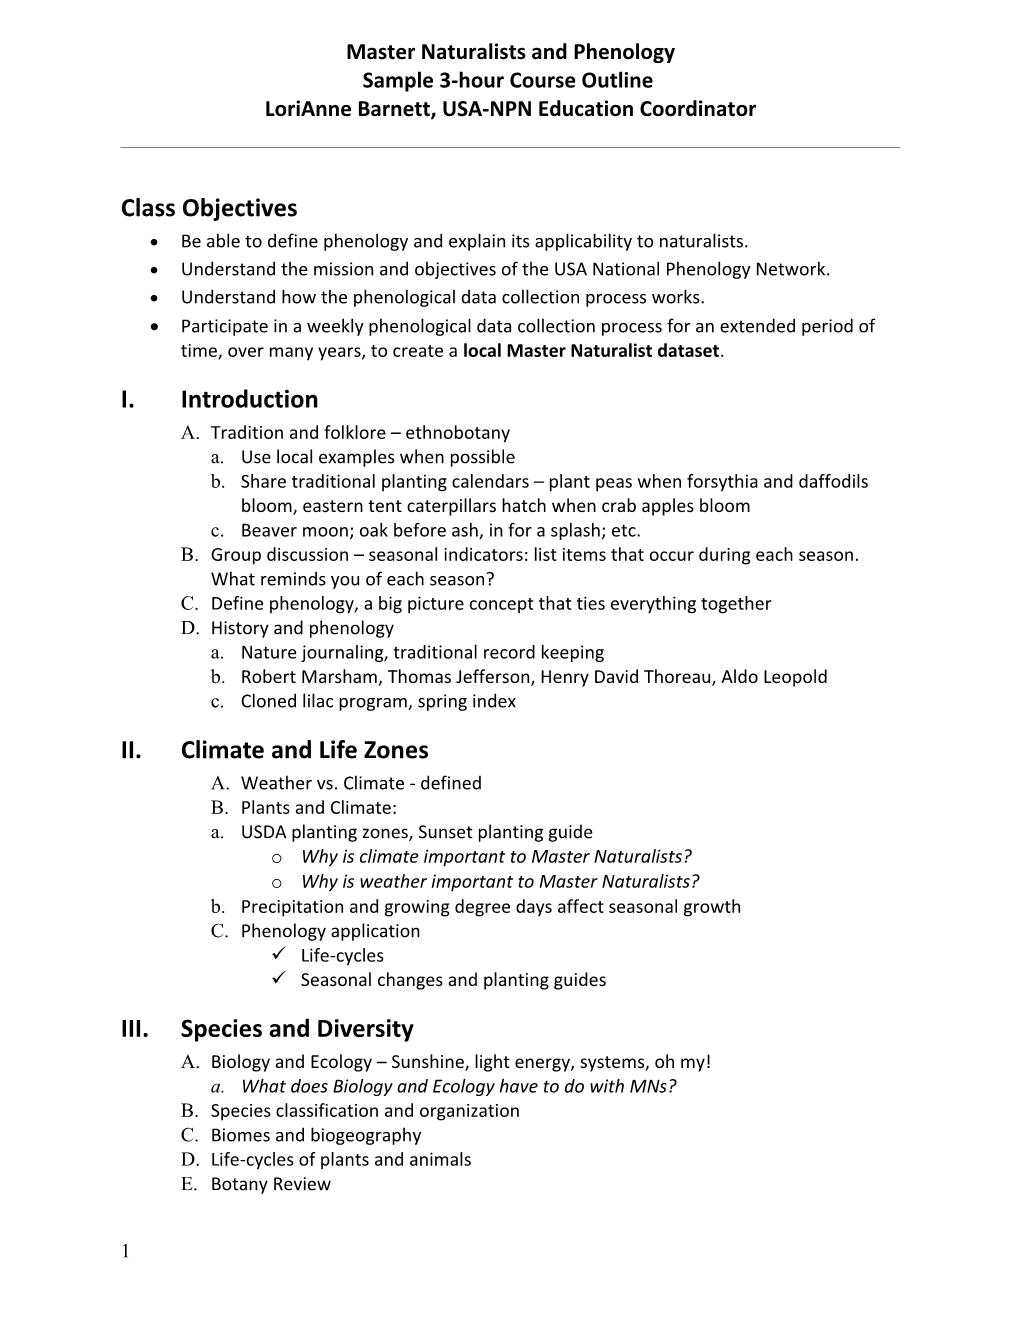 Sample 3-Hour Course Outline